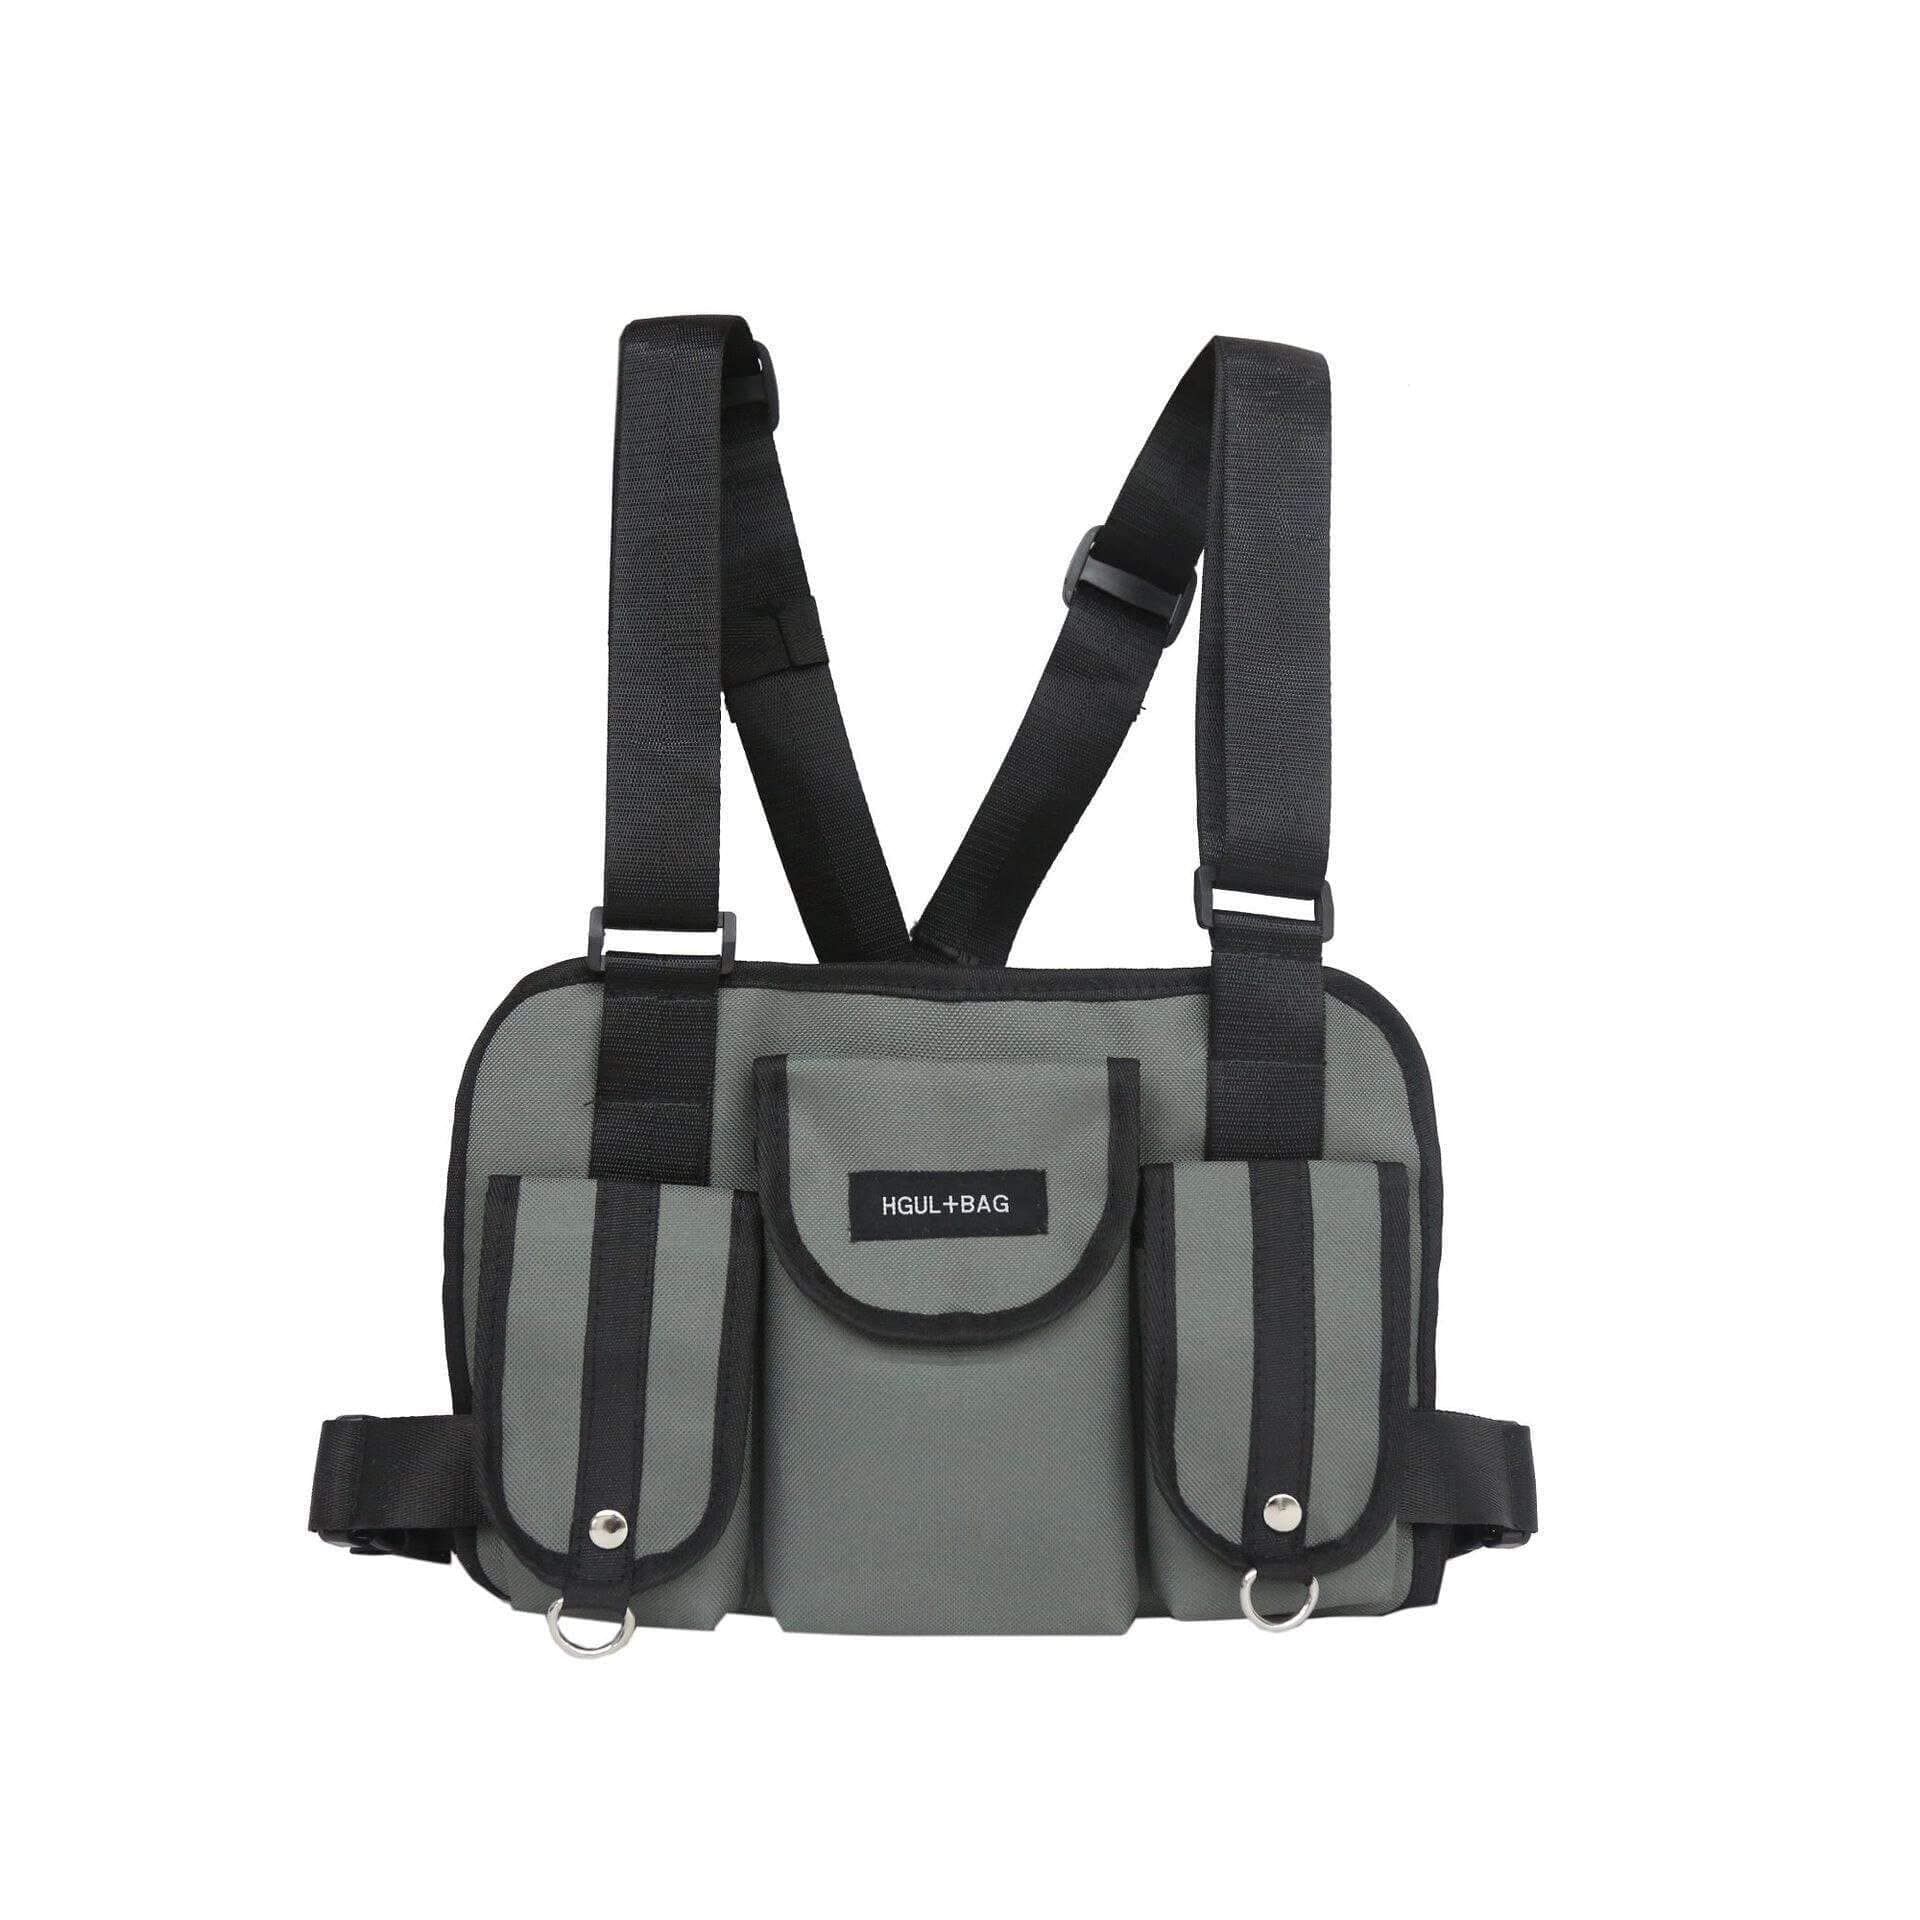 TO Functional Tactical Chest Bag